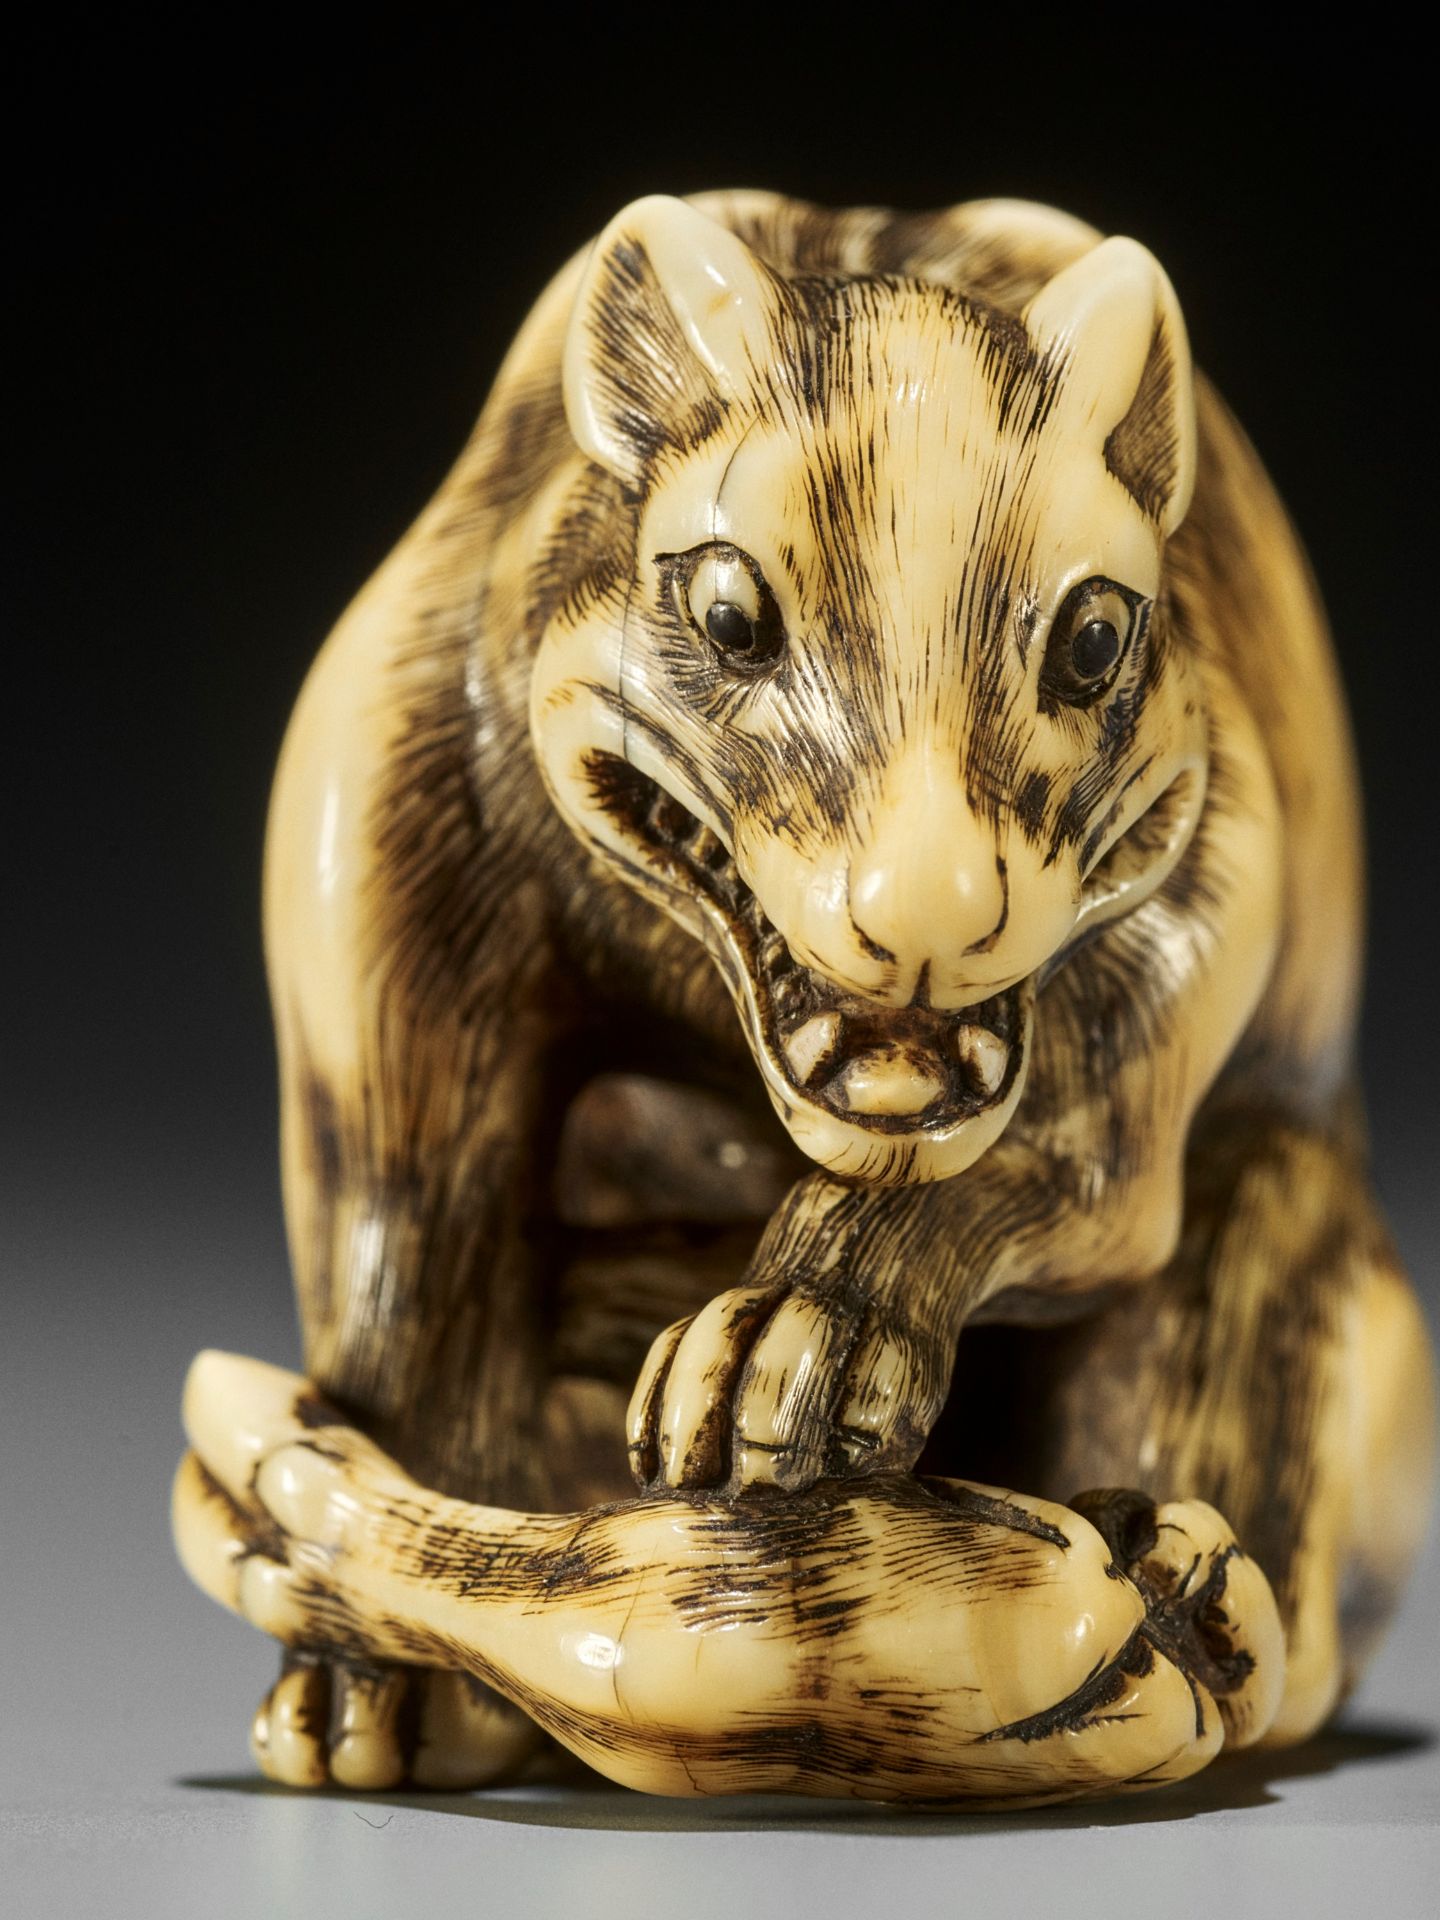 TOMOTADA: A FINE IVORY NETSUKE OF A WOLF WITH HAUNCH OF VENISON - Image 8 of 18